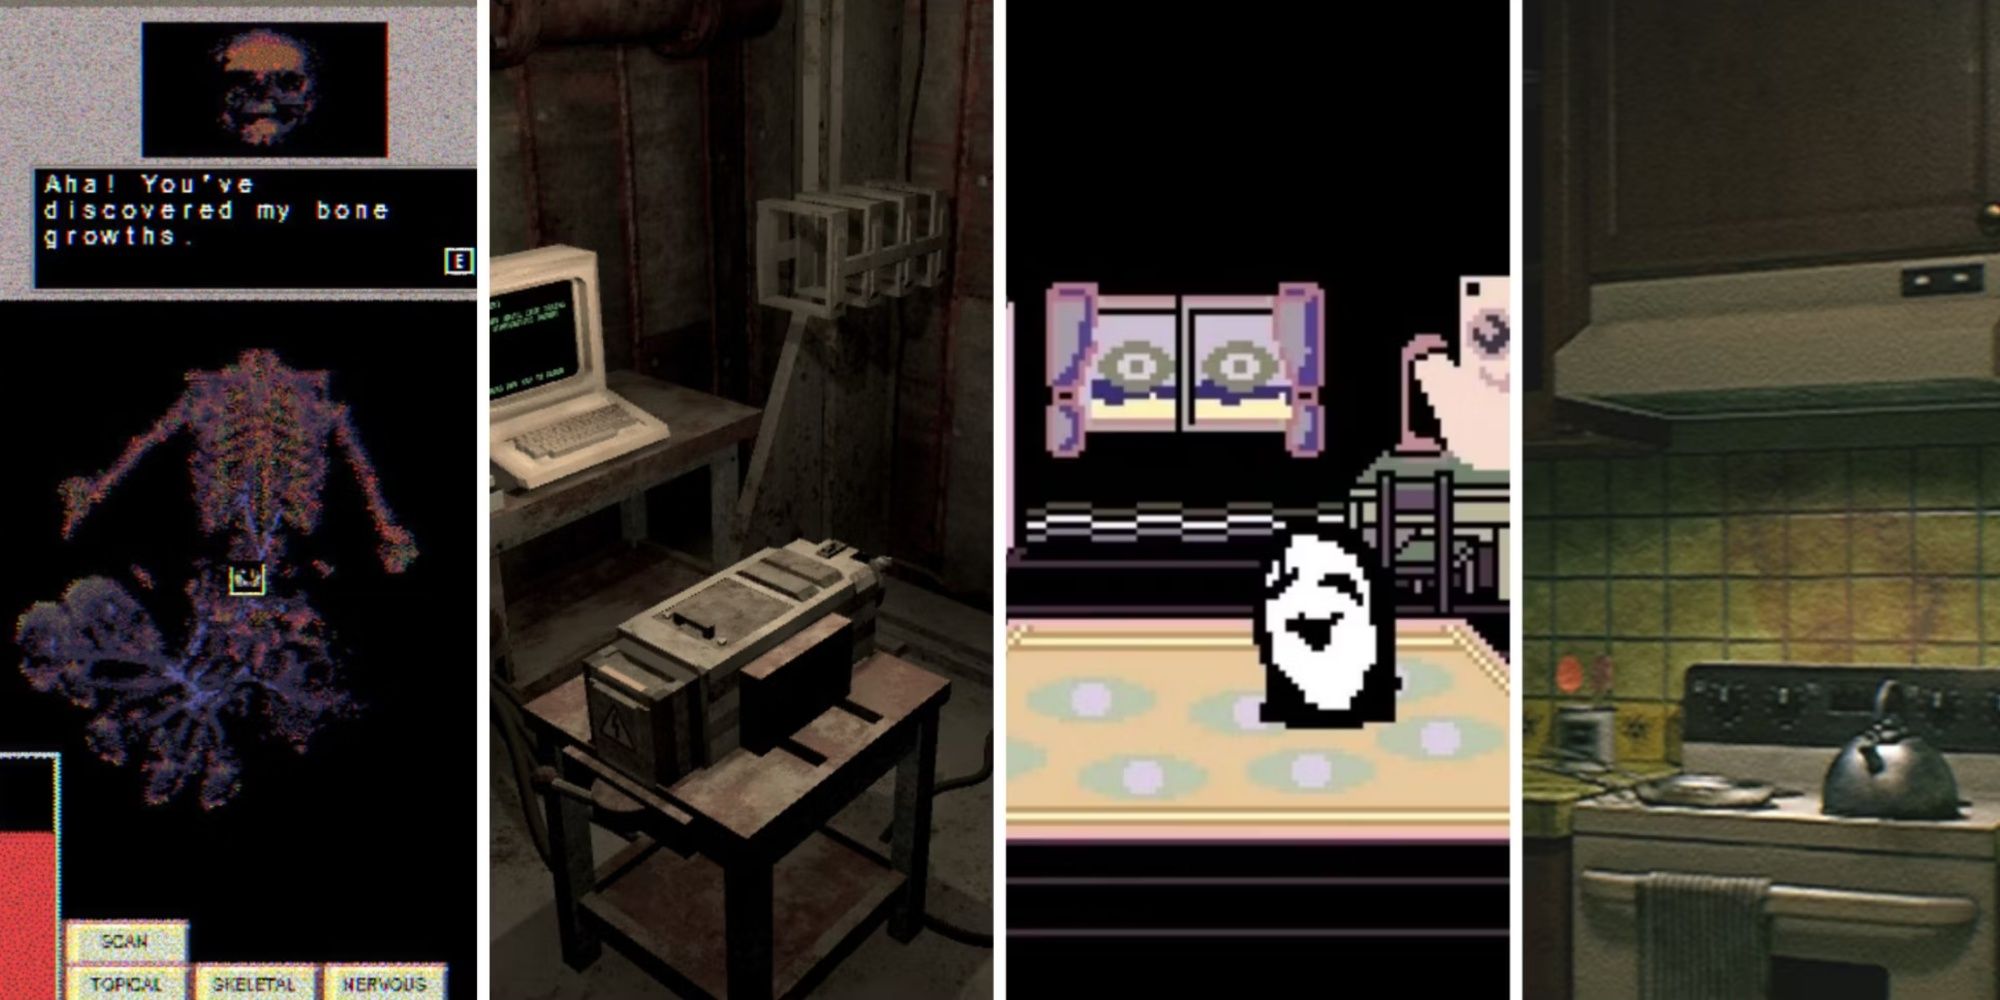 From left to right The body scanner from Discover My Body, an abandoned room from Unsorted Horror, Uboa from Yume Nikki, and a grungy kitchen from Decadence.